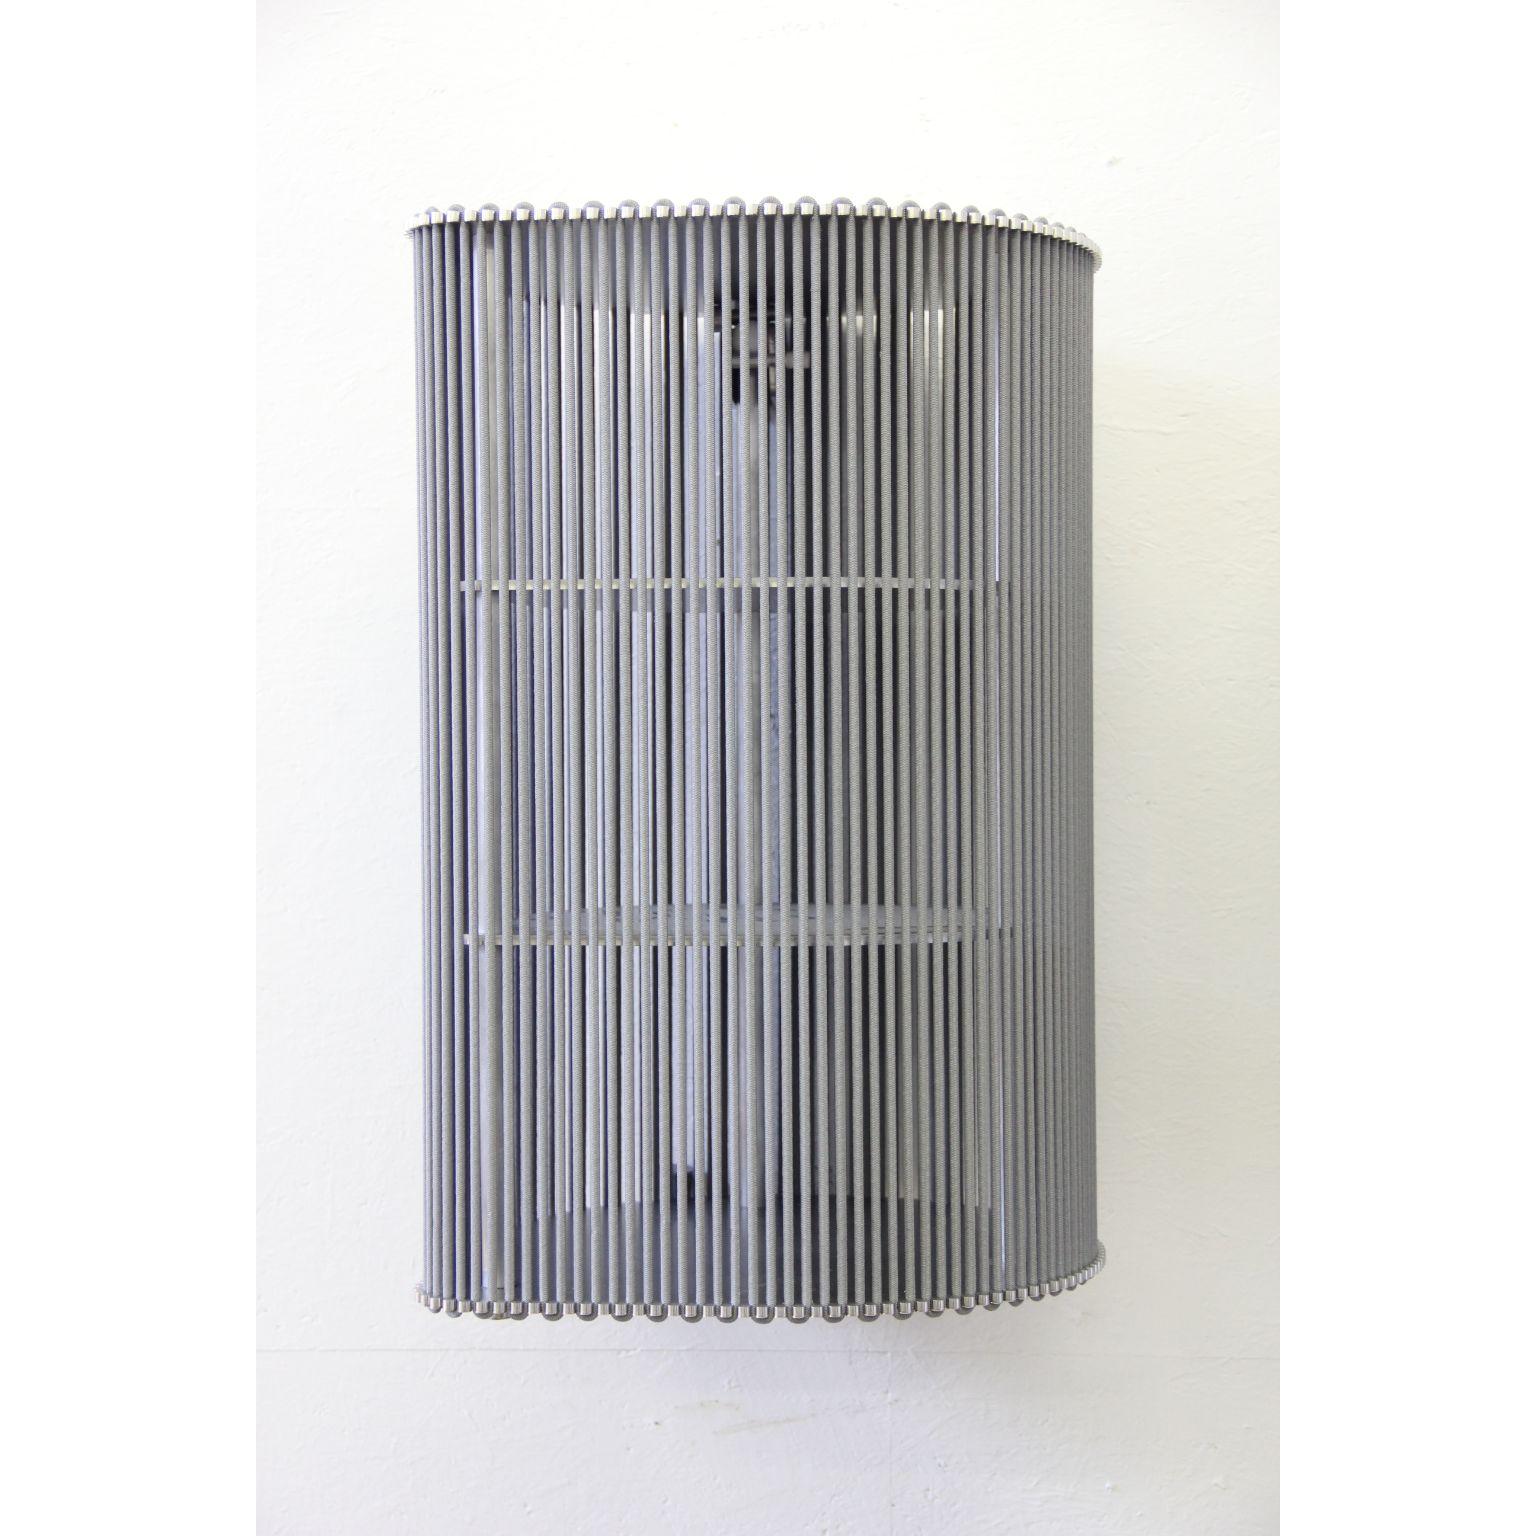 Coil square circle cabinet wall mounted/ side table by Bram Kerkhofs
Dimensions: D 40 x W 40 x H 75.2cm
Materials:Stainless steel, aluminium, elastic rope (natural rubber, polyethylene).

Other dimensions are available.

COIL is a modular